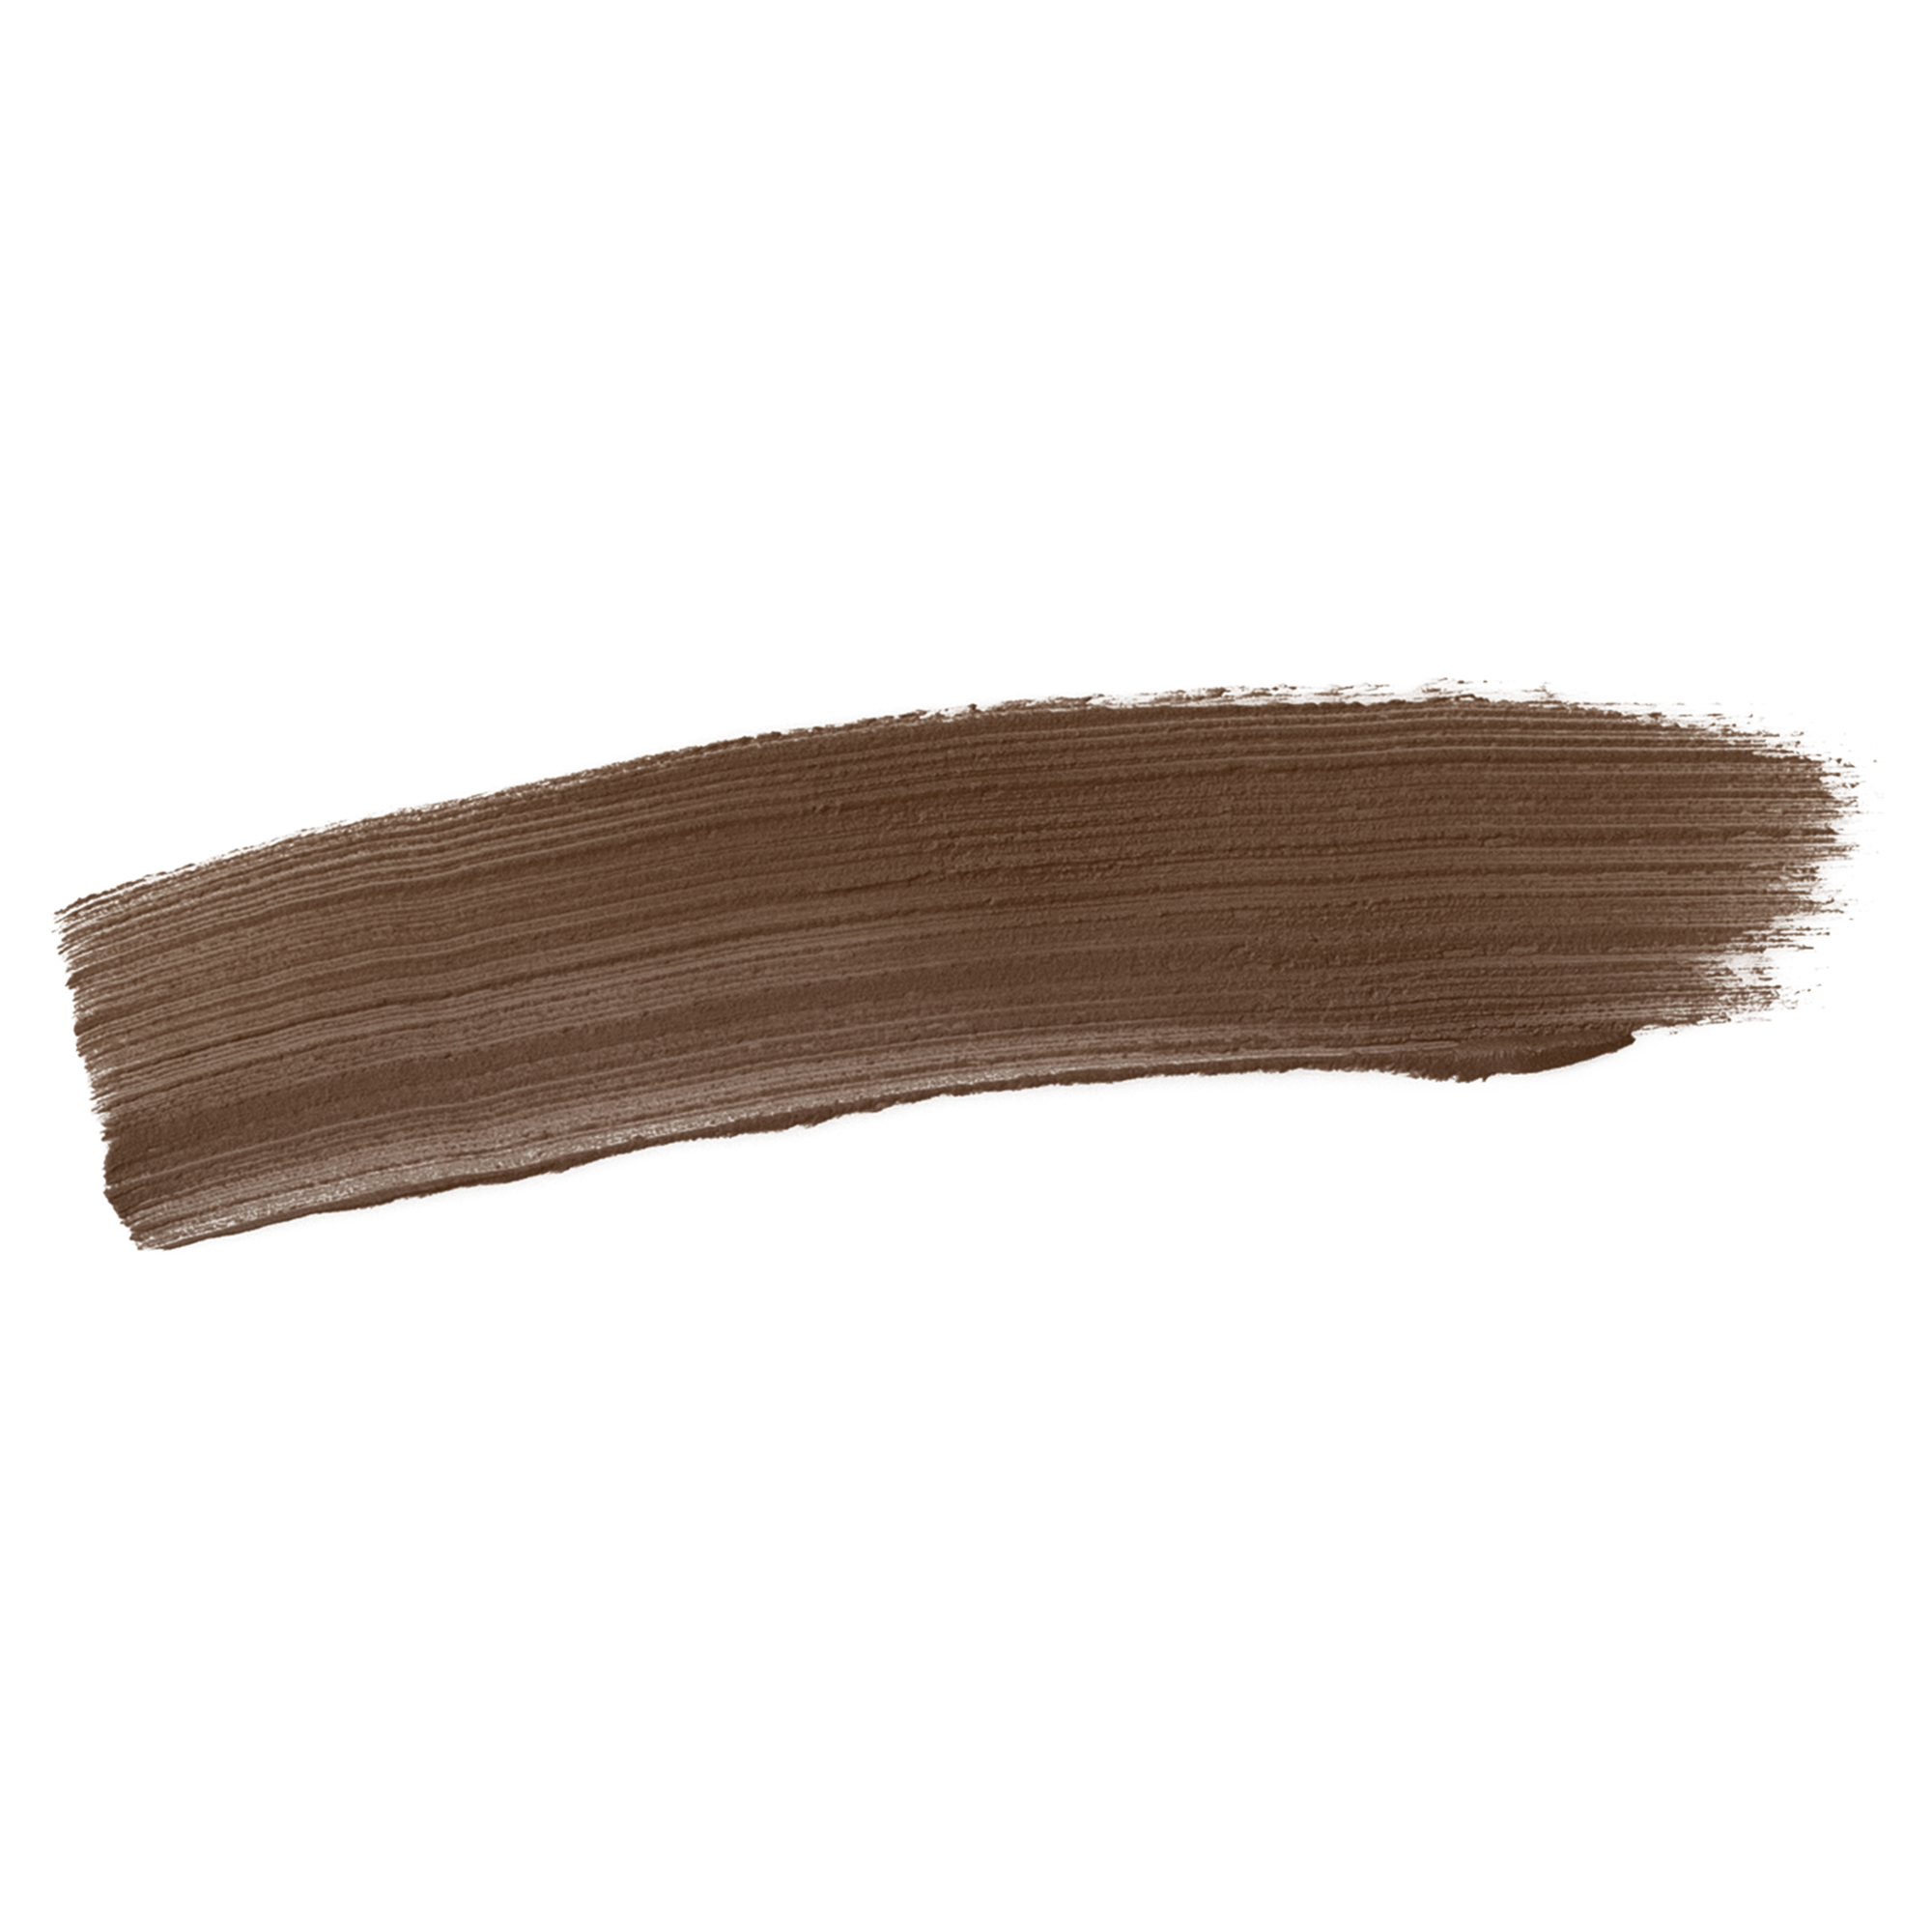 Benefit Cosmetics POWMade Brow Pomade, in Colour: 3.75 Warm Medium Brown, Size: One Size